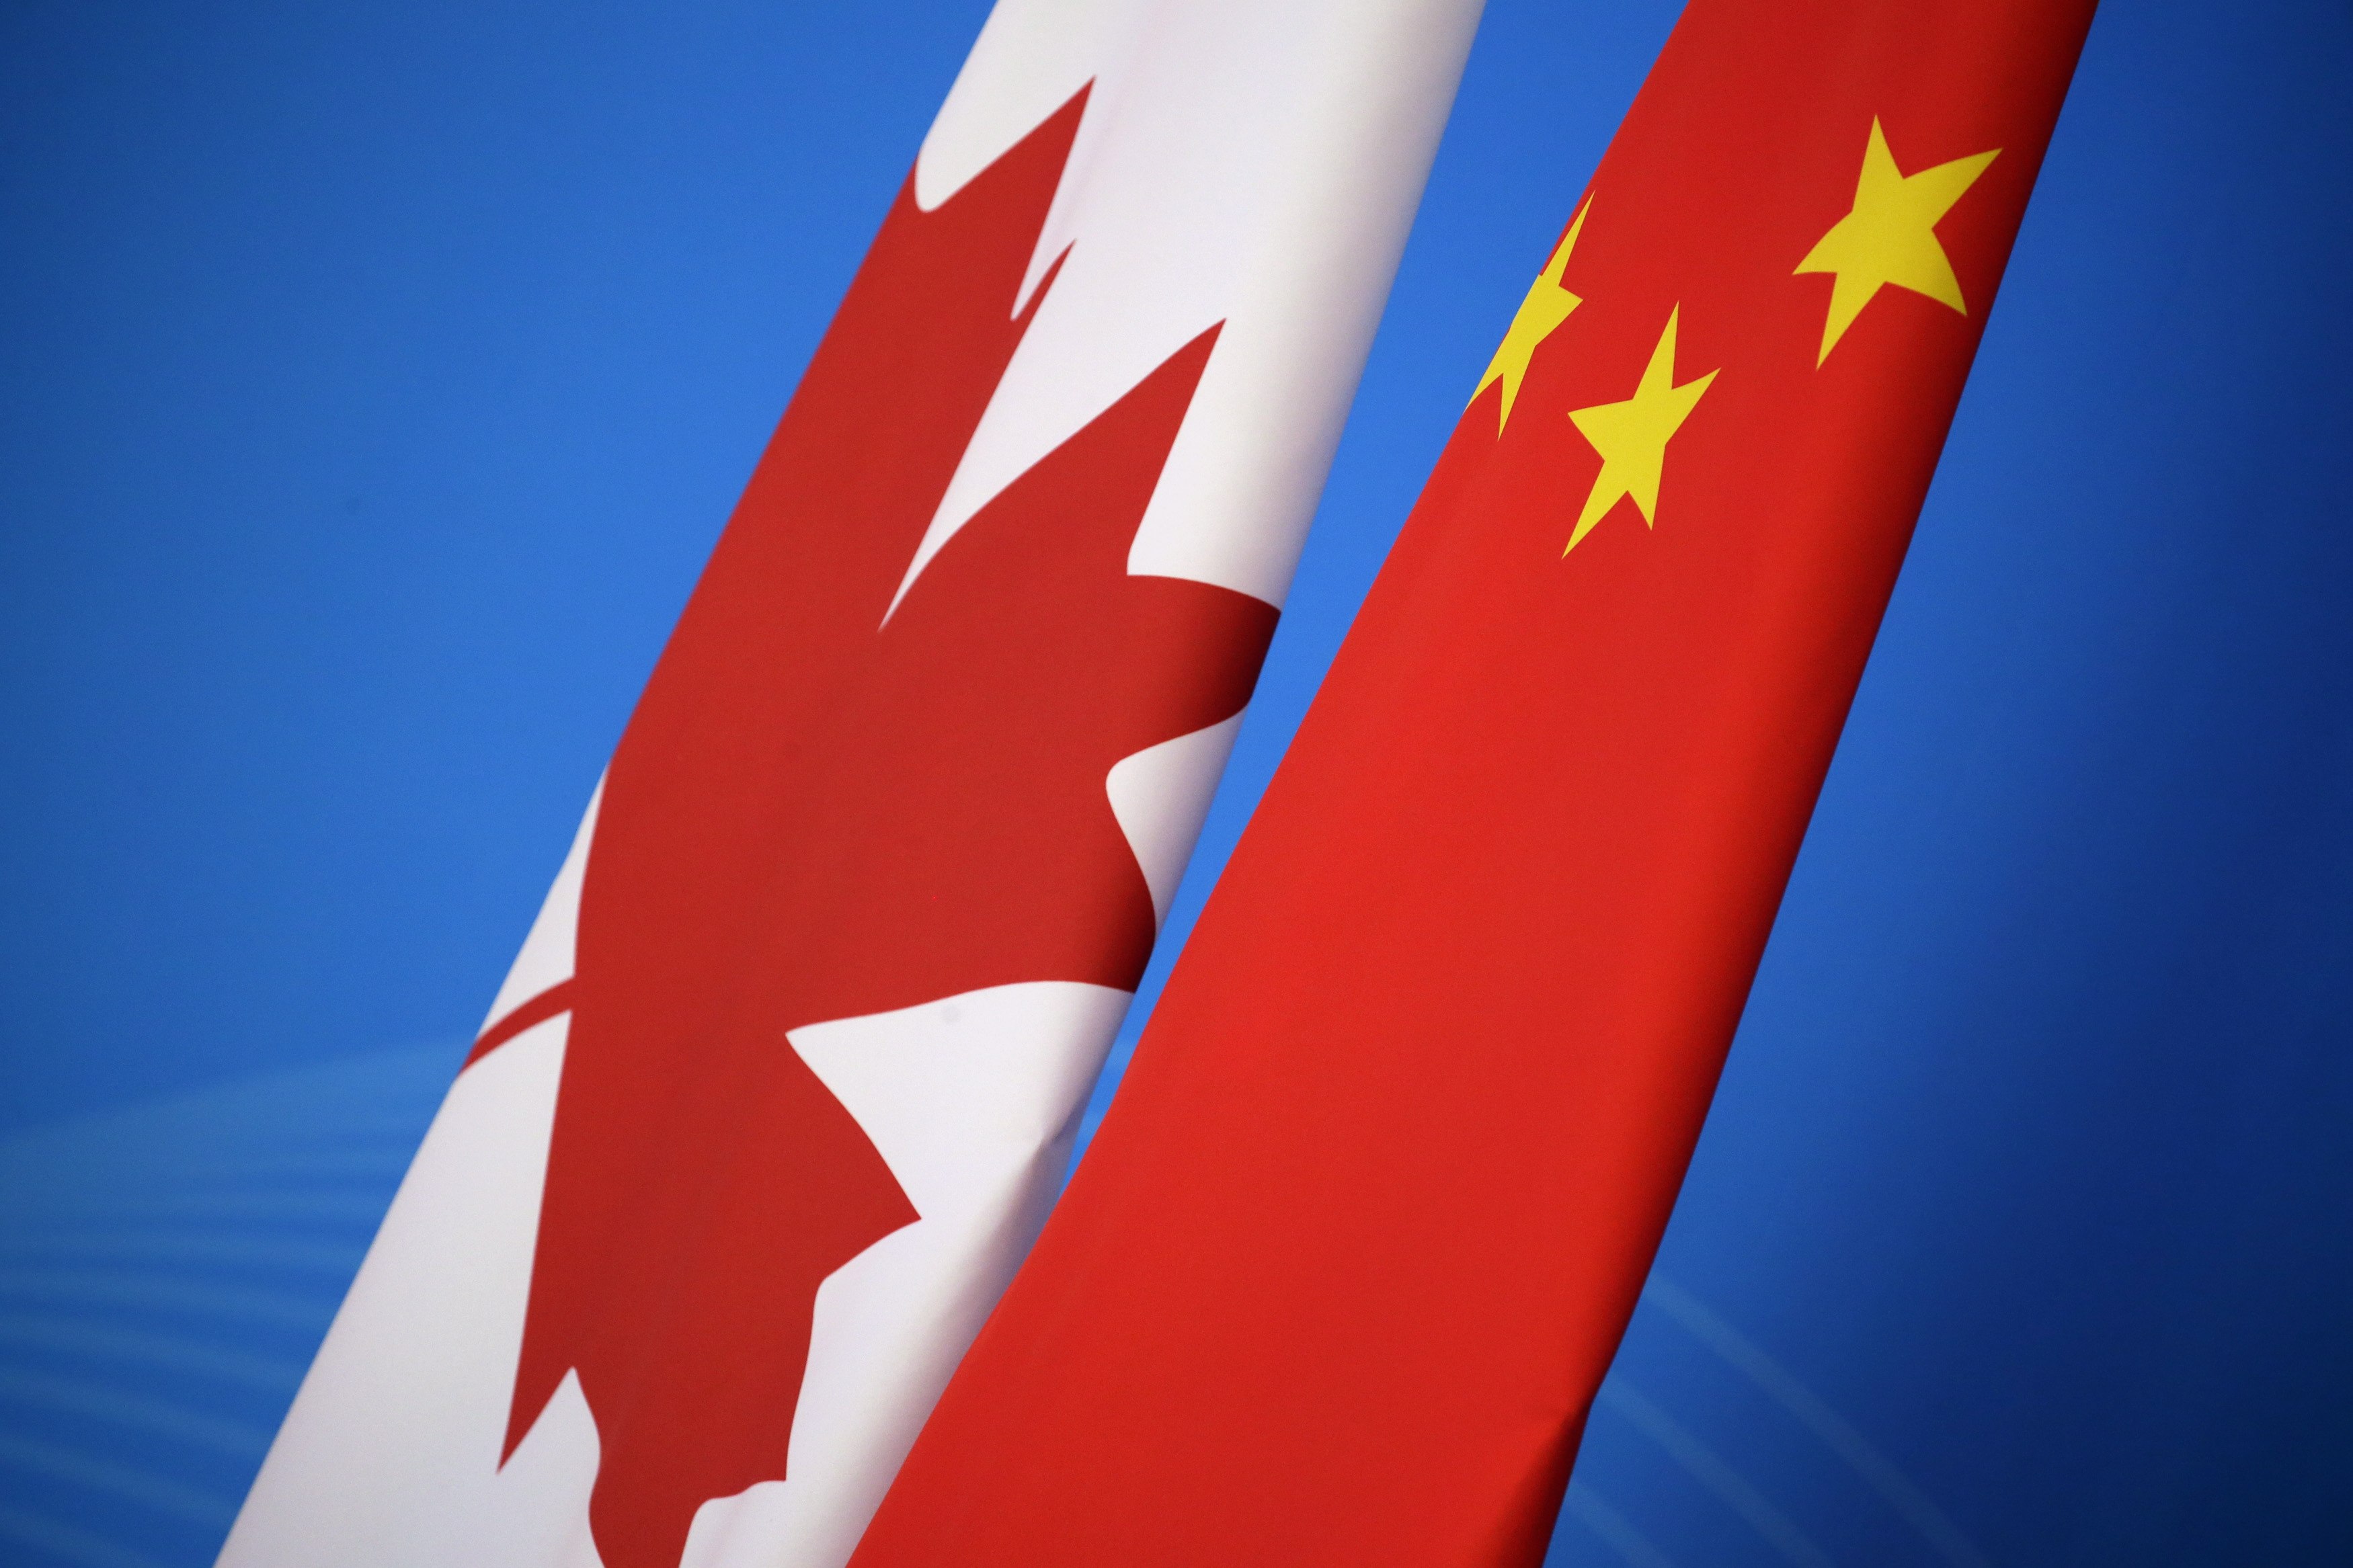 CSIS alleges Chinese intelligence is recruiting Canadians via LinkedIn. Its warning to Canadians comes as the country continues to grapple with numerous reports of Chinese interference in domestic affairs – claims Beijing denies. Photo: EPA-EFE